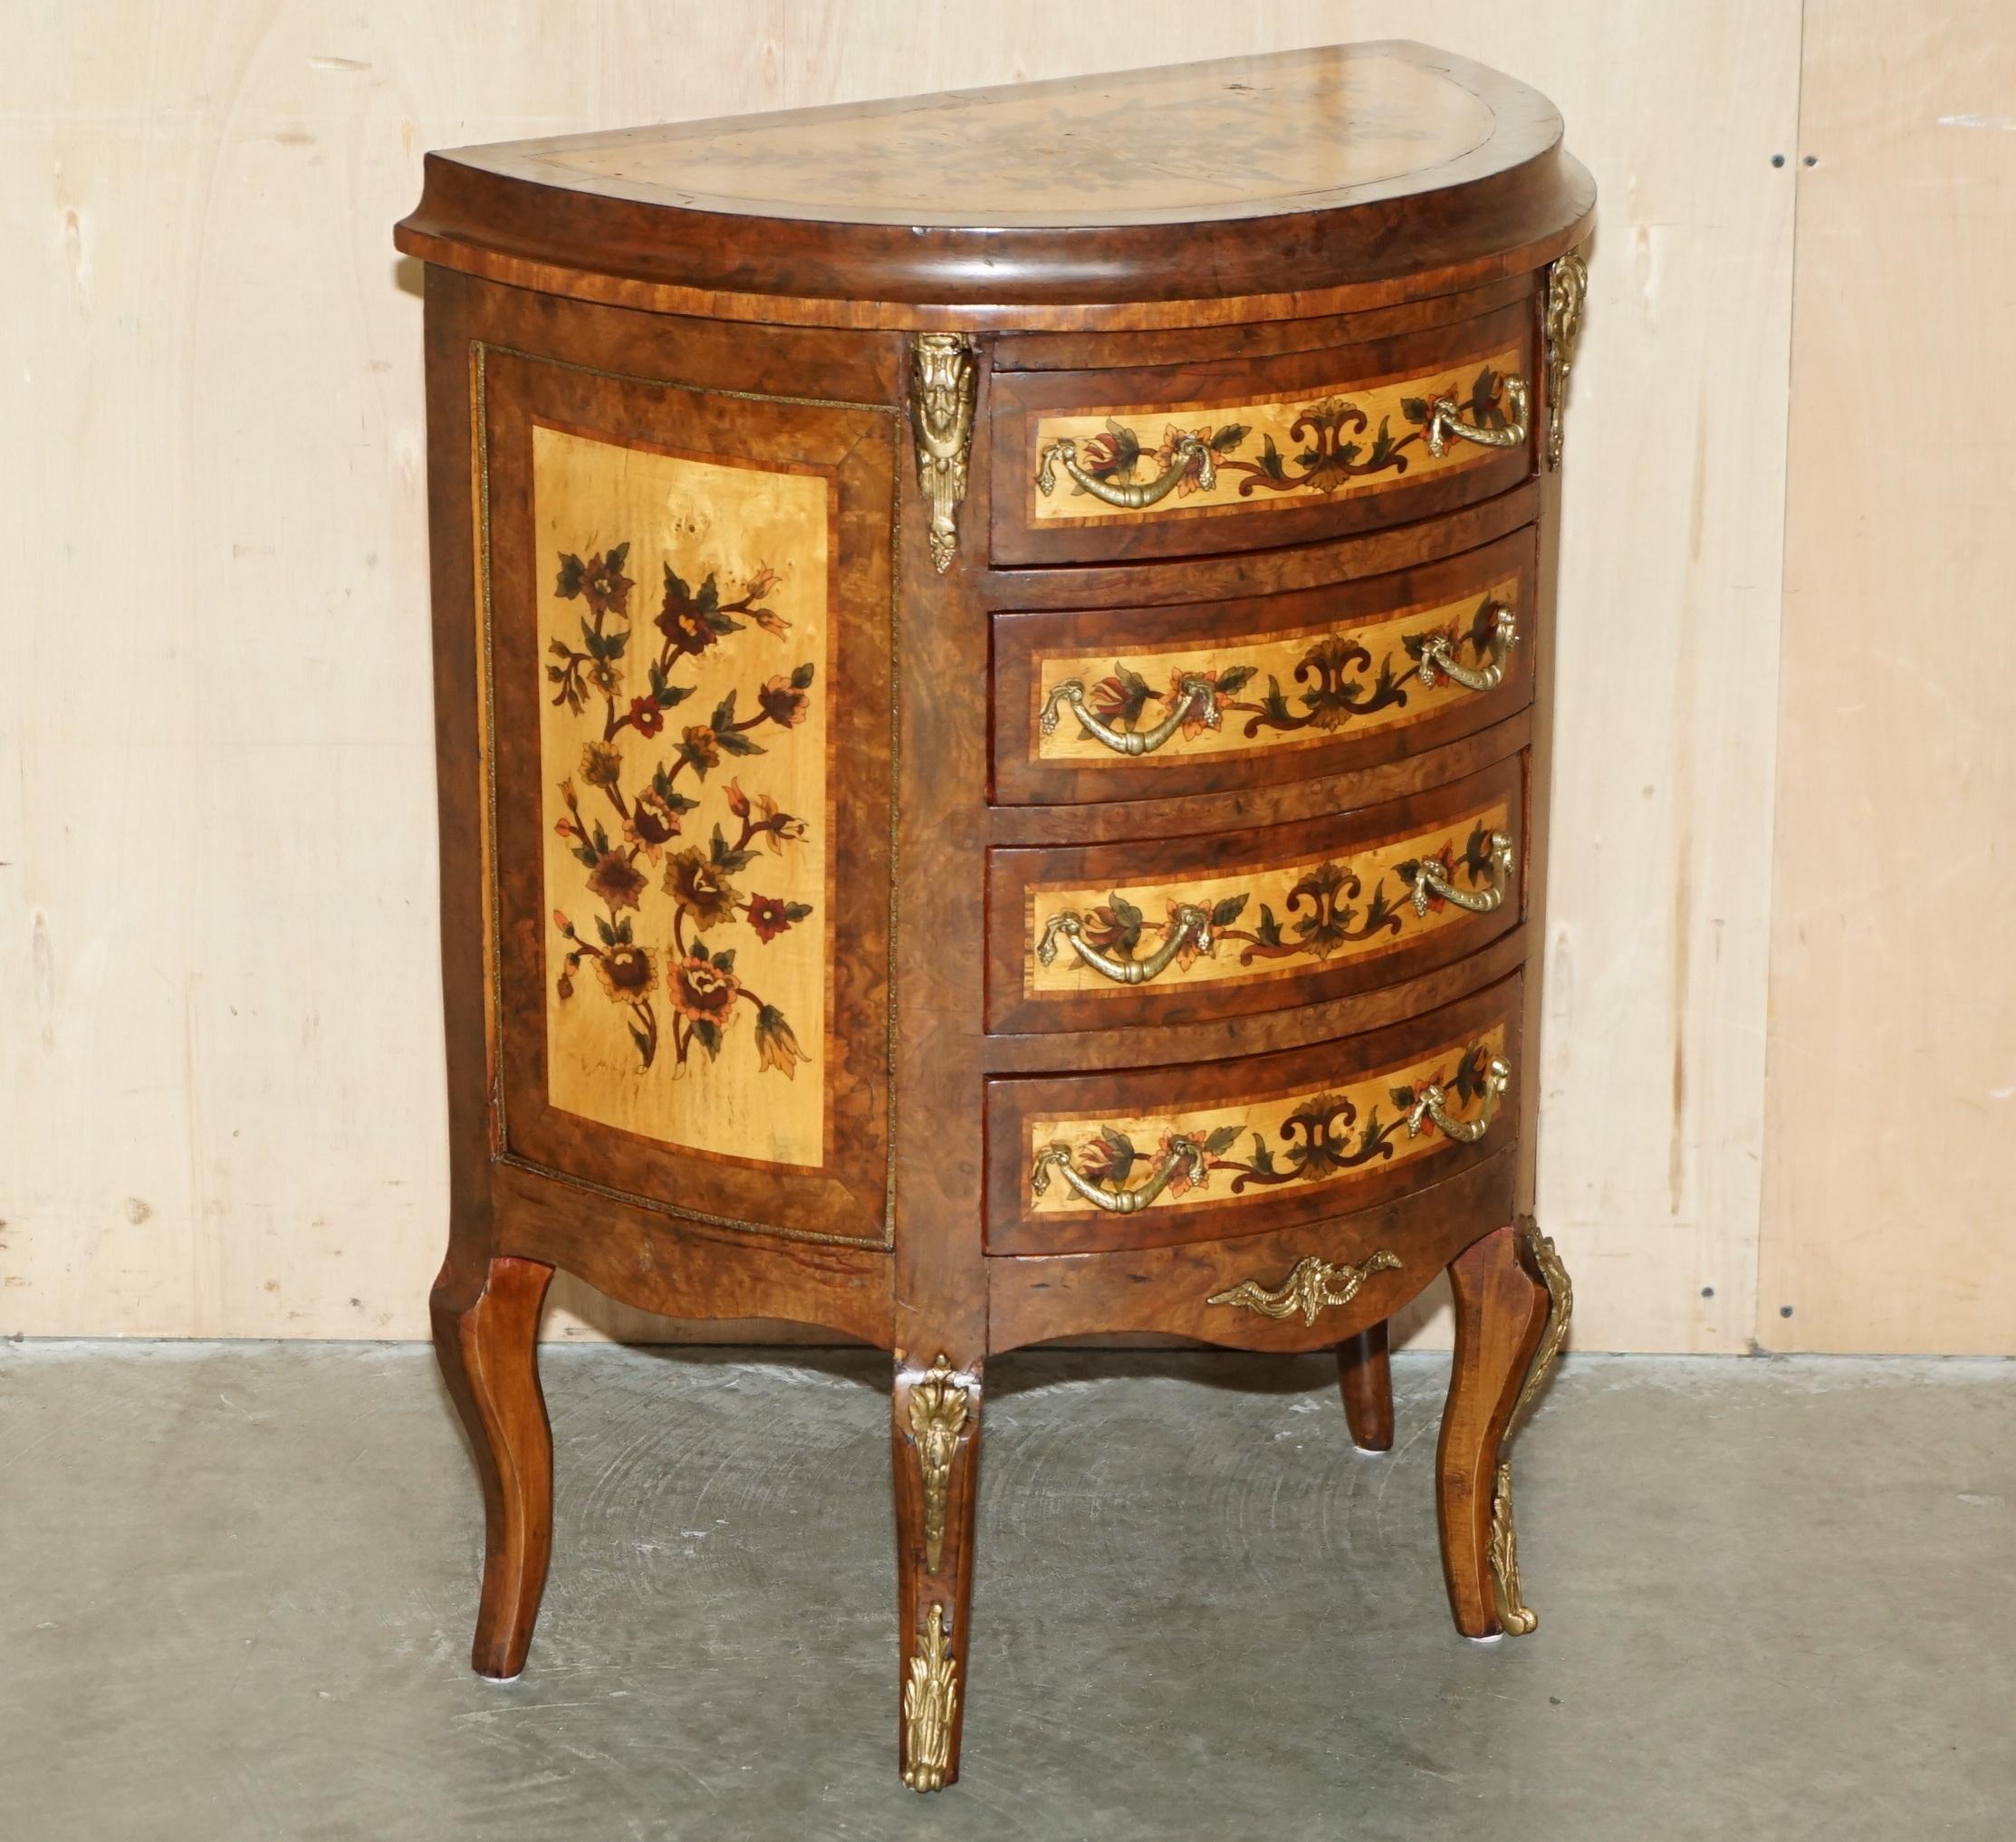 Royal House Antiques

Royal House Antiques is delighted to offer for sale this exquisite French Burr Walnut, Walnut and Satinwood Demi Lune sideboard with four drawers and finished with an ornate Floral painted decorative

Please note the delivery